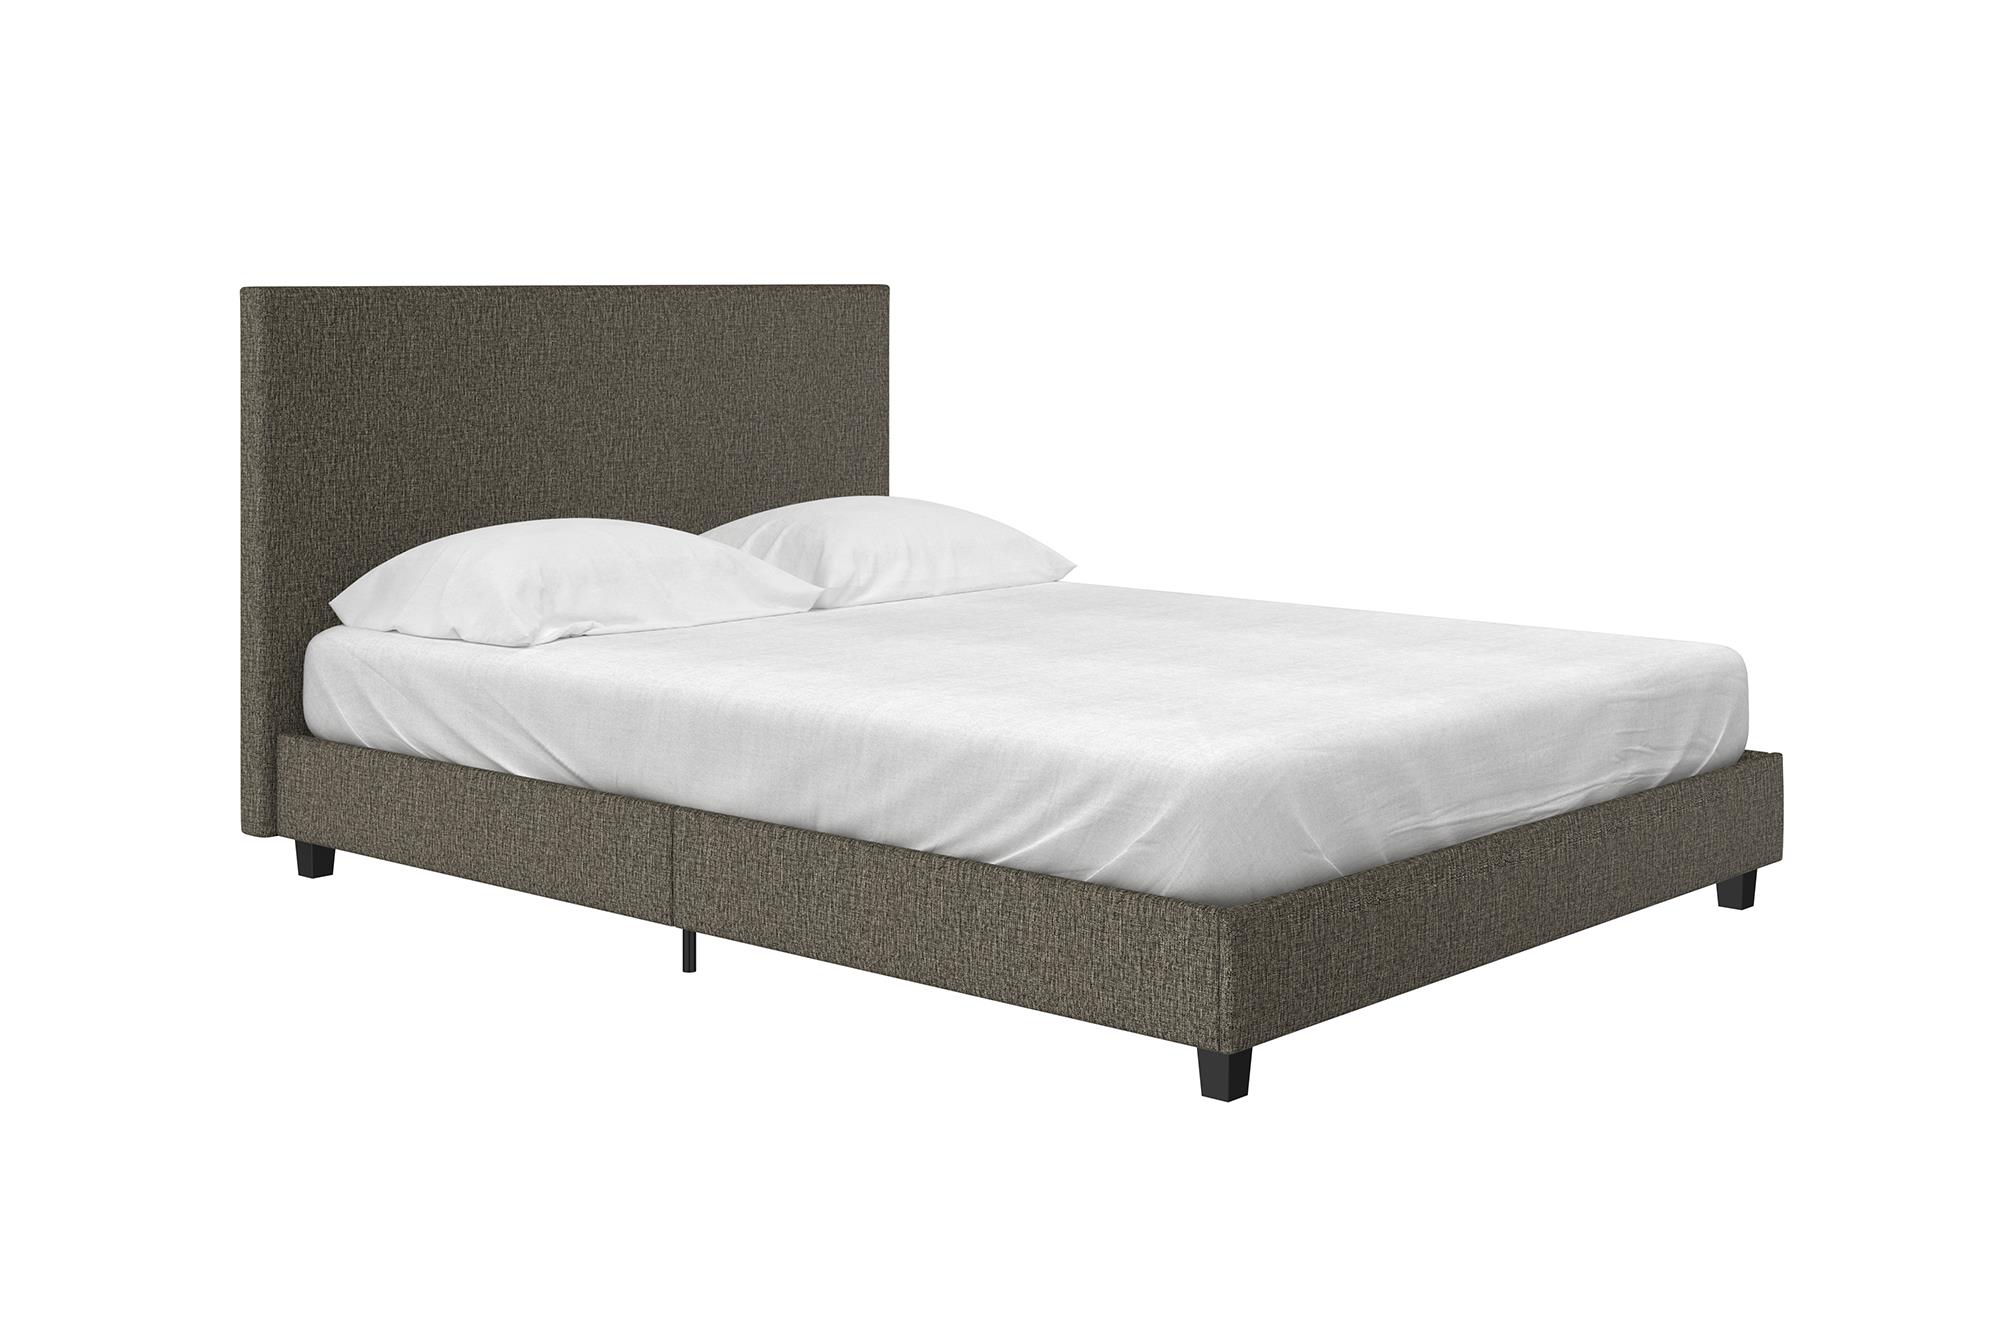 Mainstays Upholstered Bed, Queen Bed Frame, Gray Linen - image 2 of 21